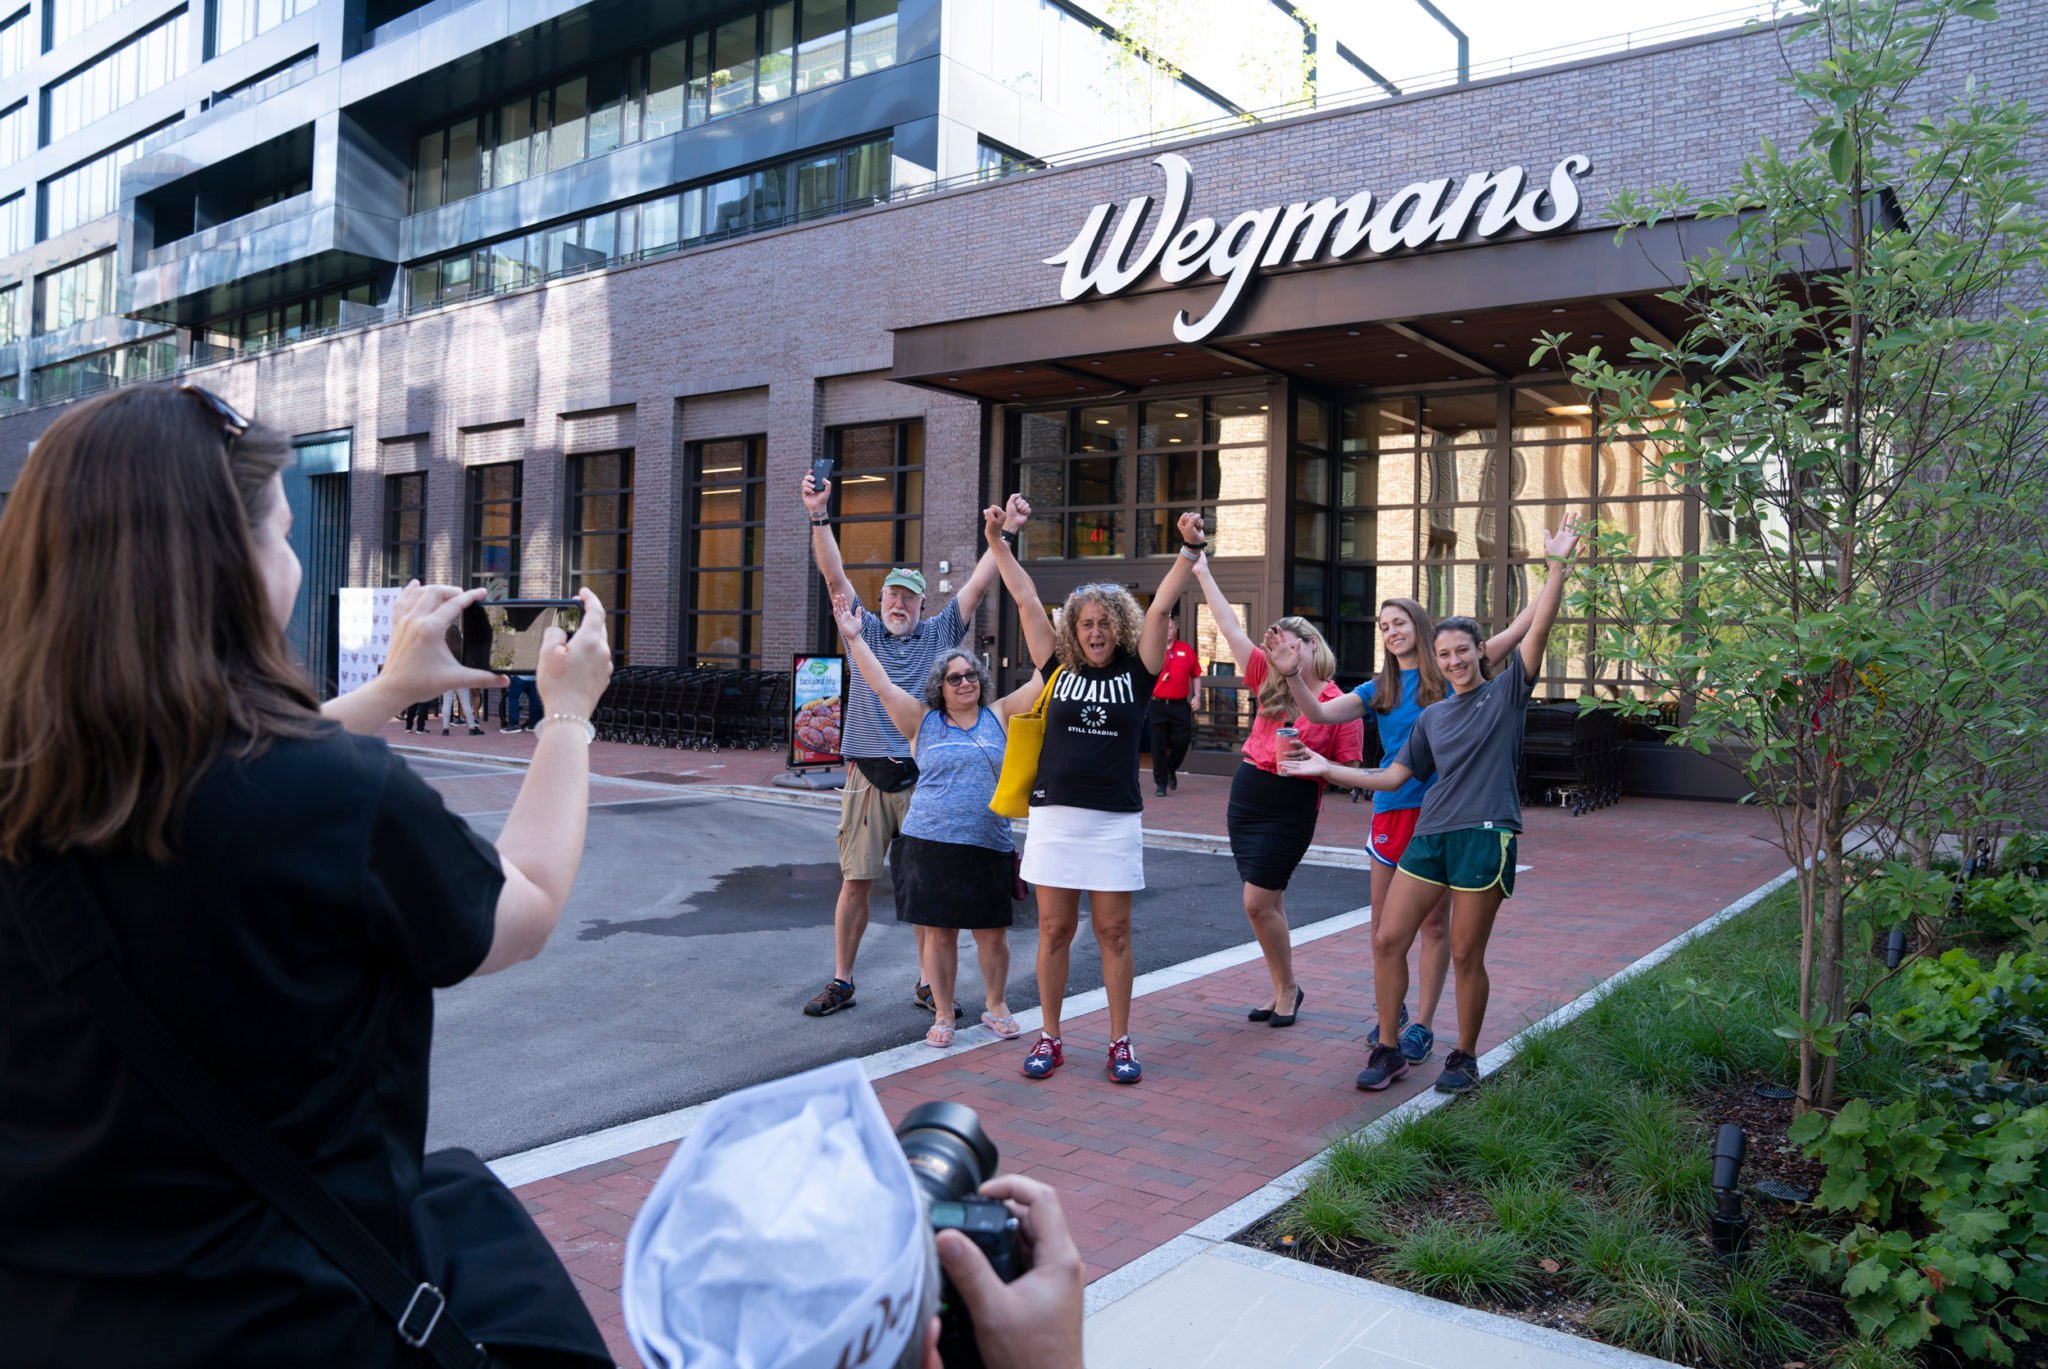 PHOTOS: The People First in Line for Wegmans’ DC Opening